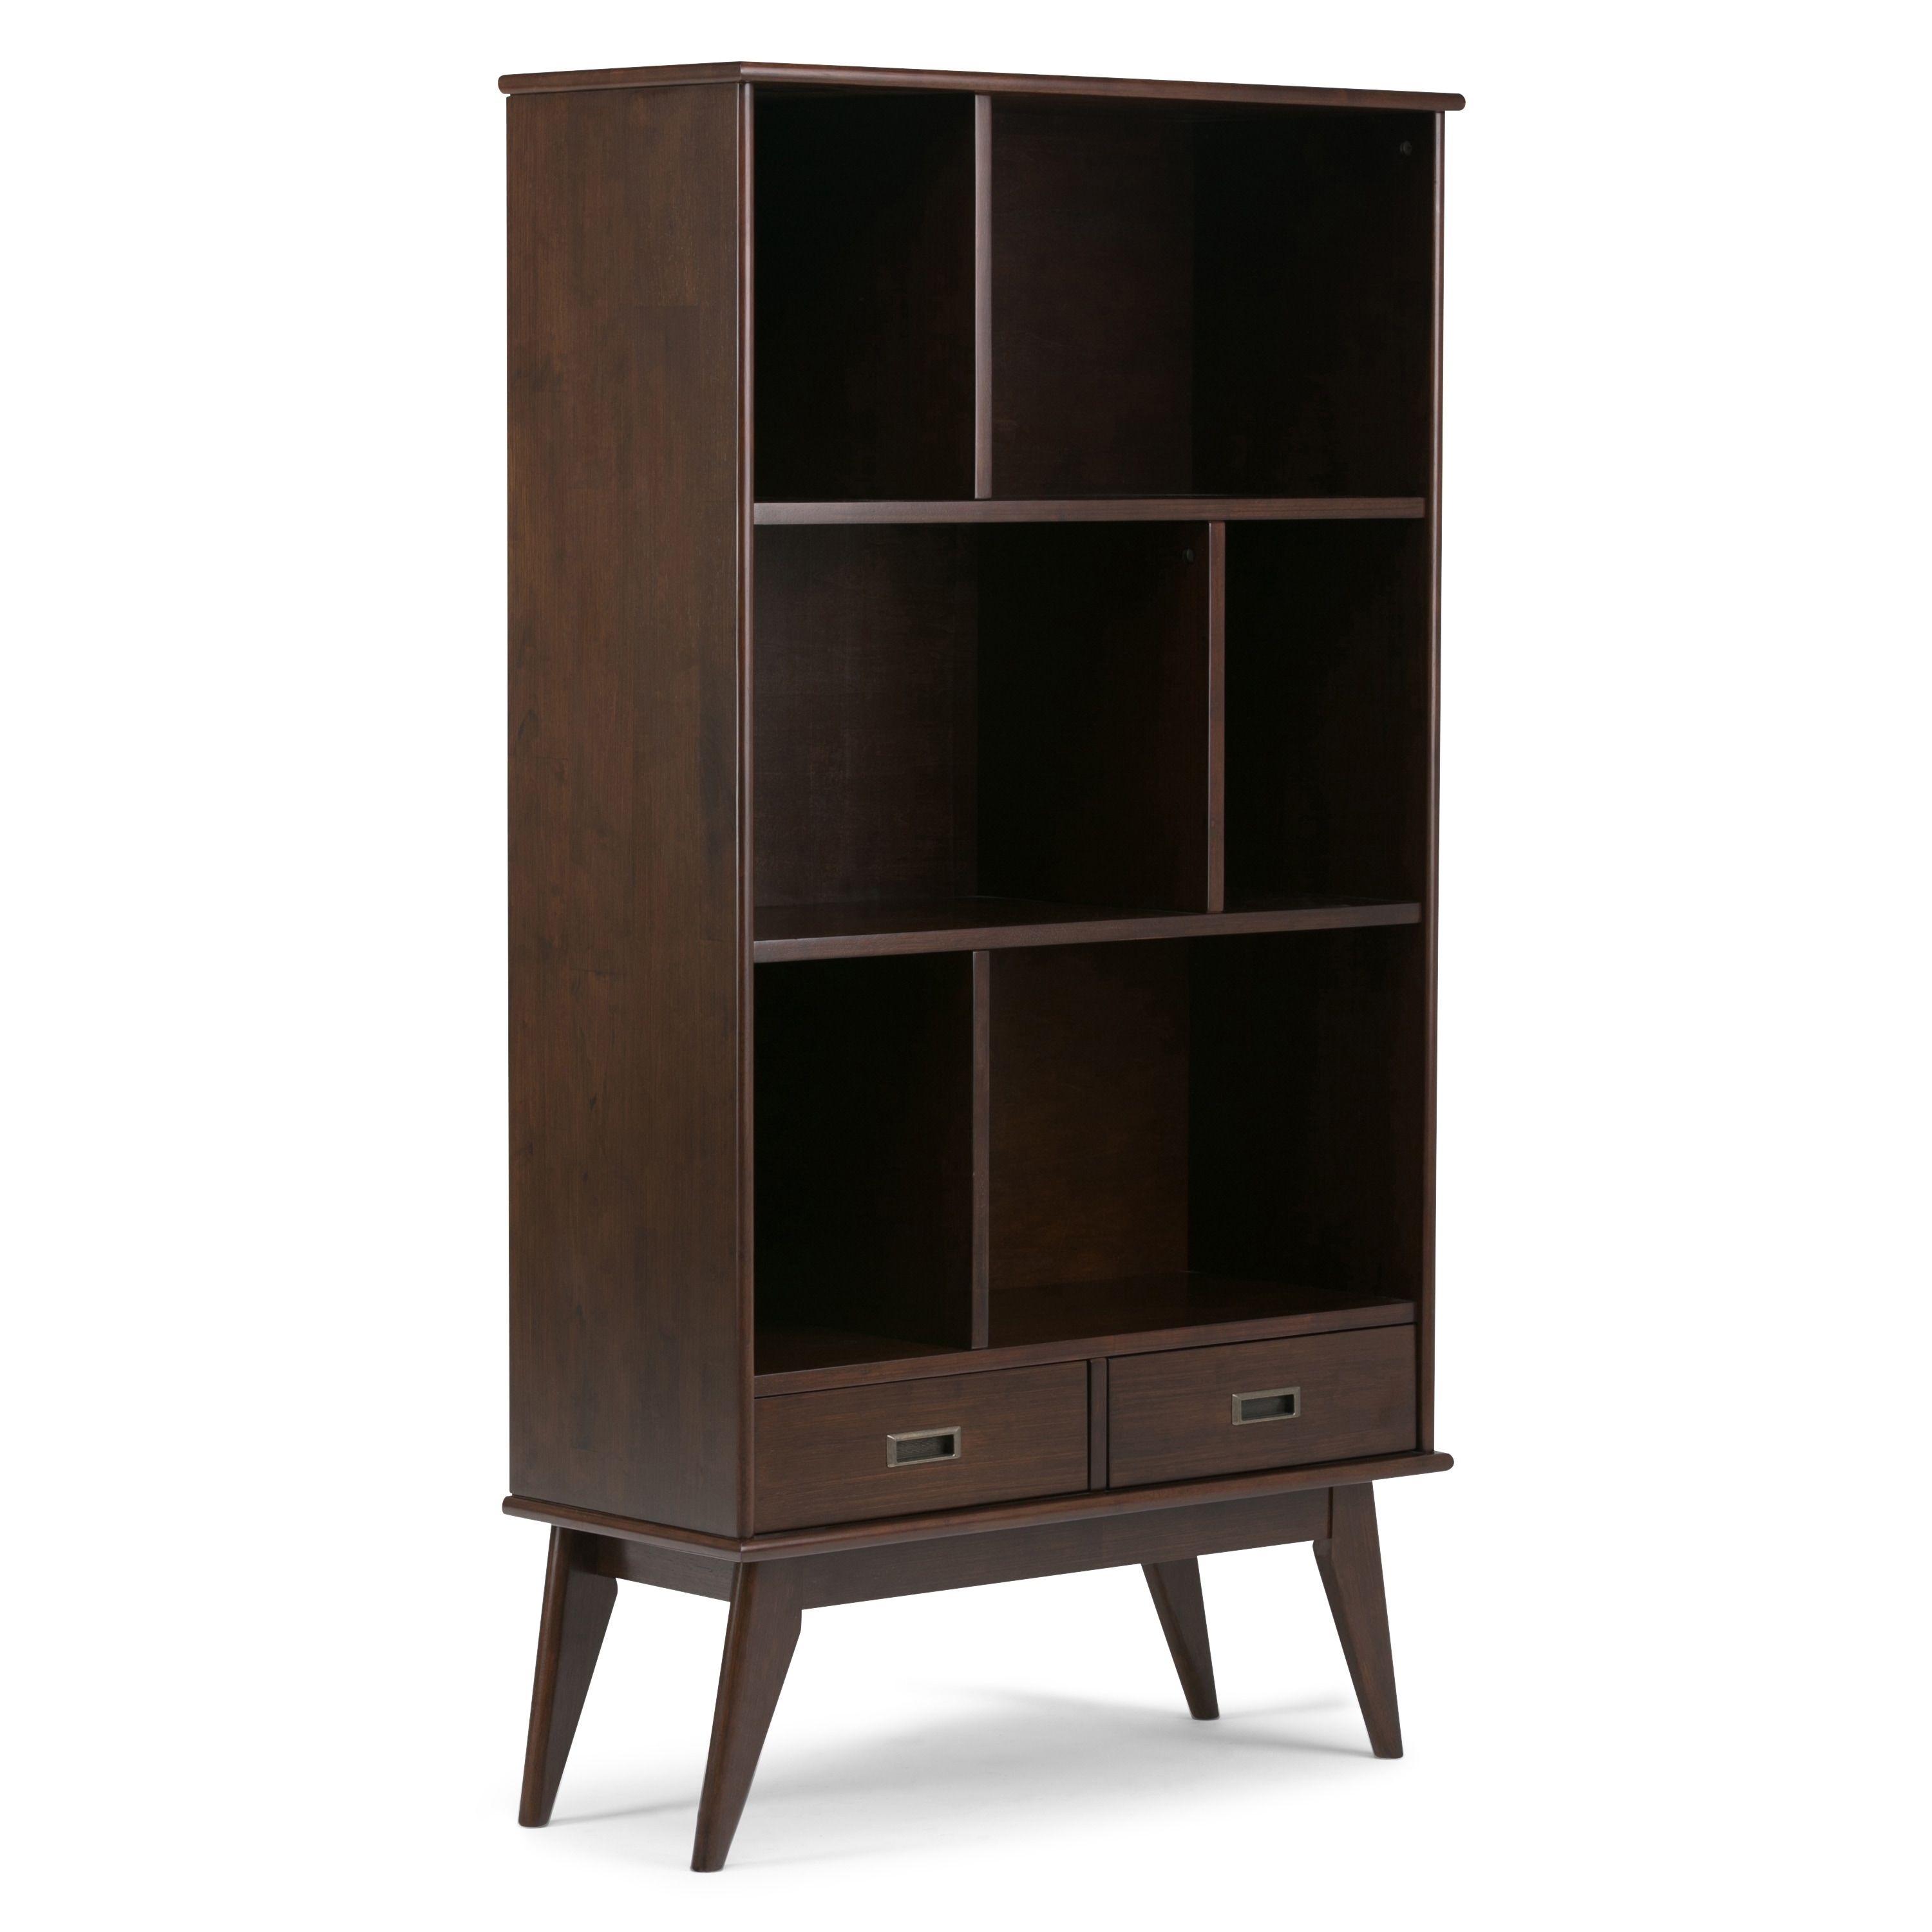 WyndenHall  Tierney SOLID HARDWOOD 64 inch x 35 inch Mid Century Modern Wide Bookcase and Storage Unit - 35"w x 14"d x 64" h Teak Brown Stained - image 3 of 5